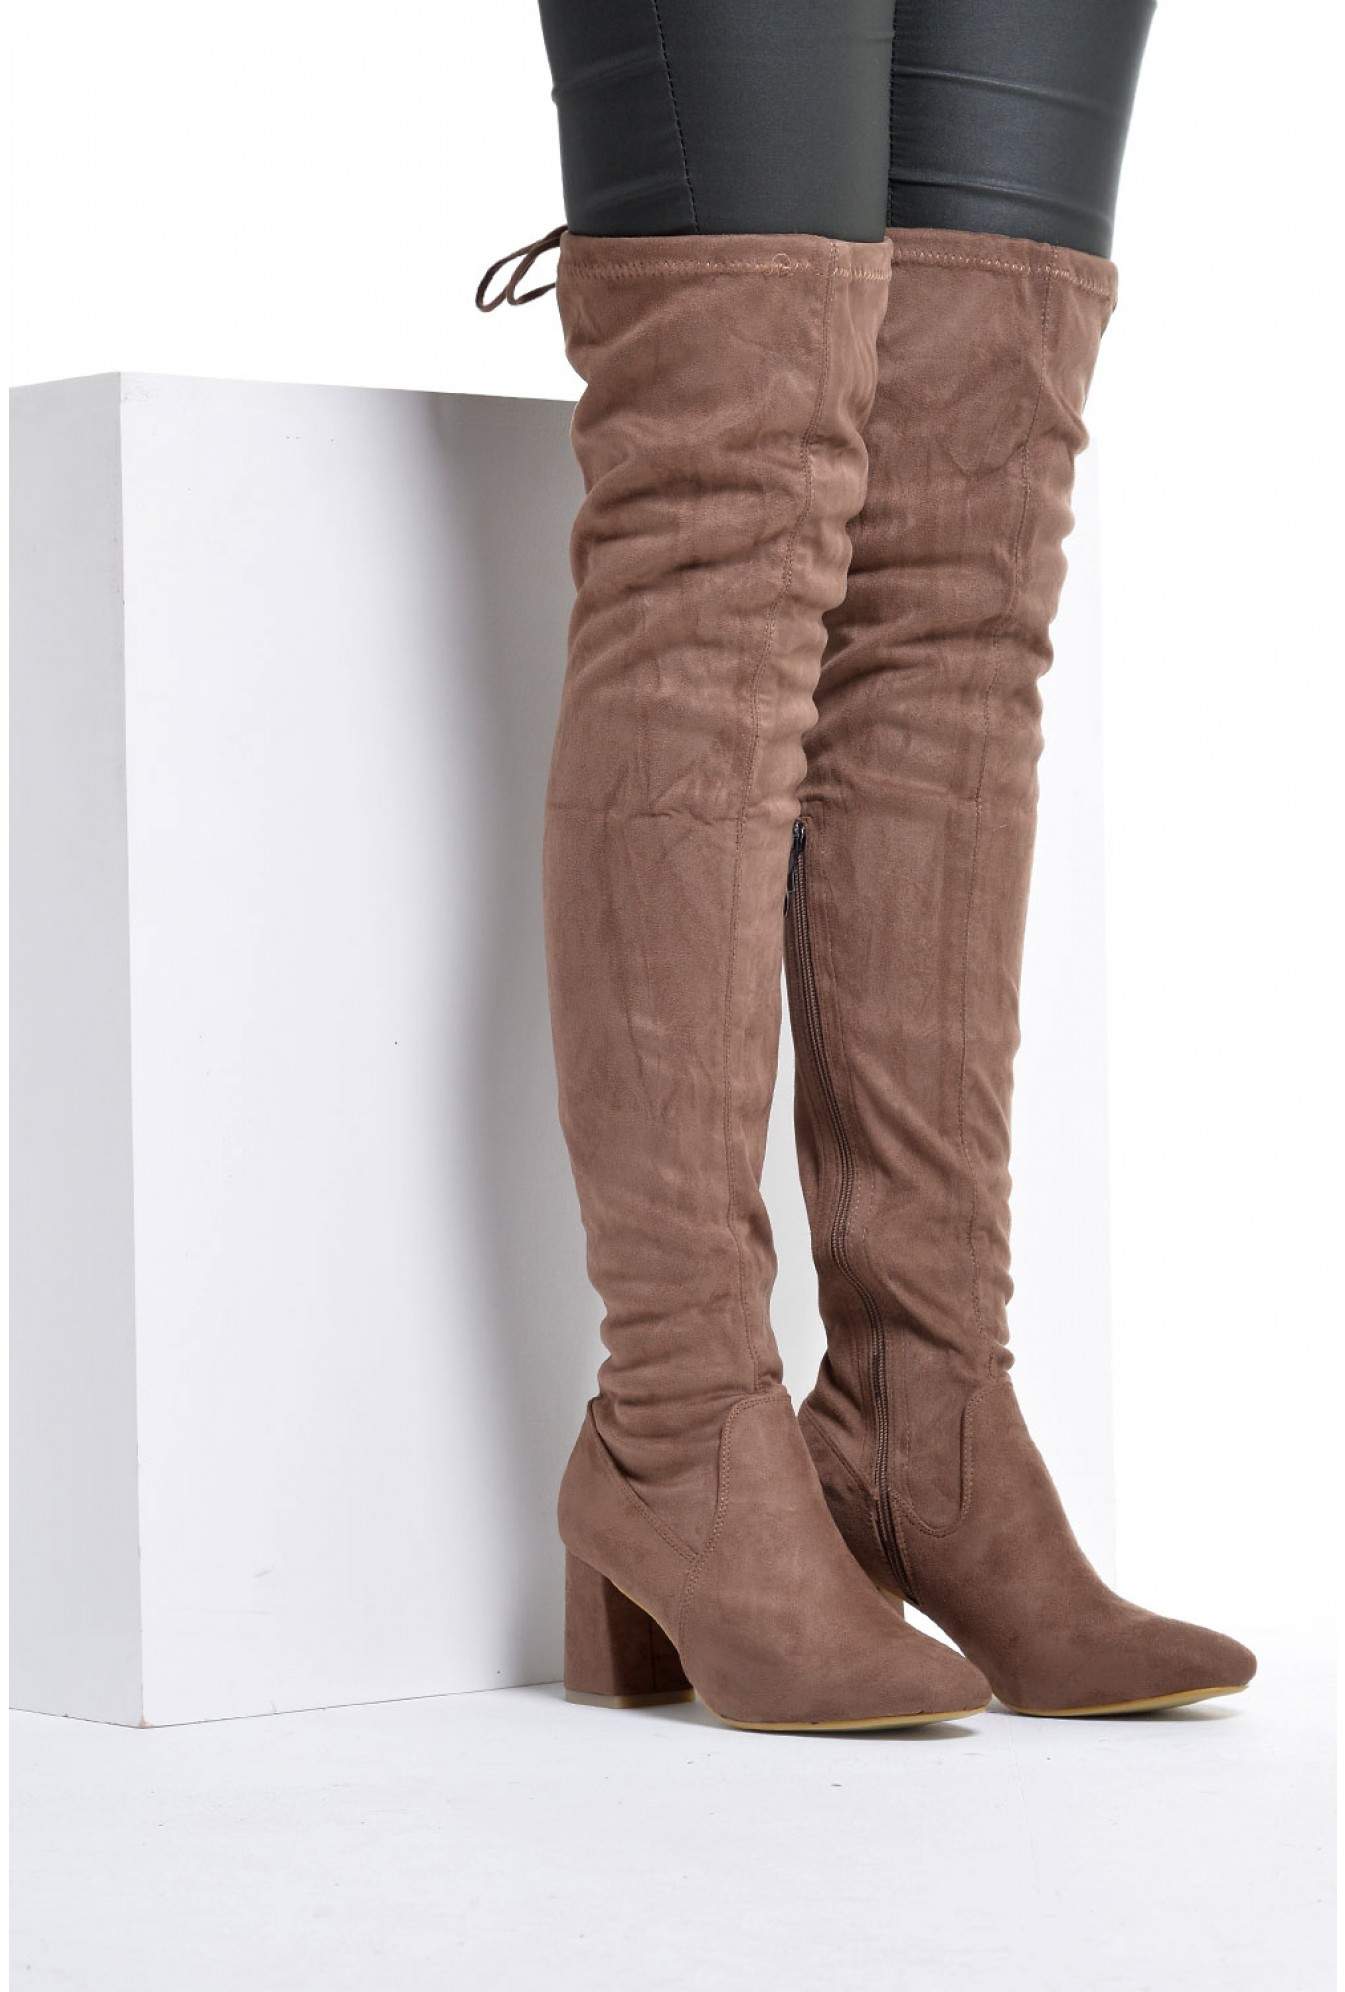 No Doubt Wendy Over The Knee Sock Boots in Mocha Suede | iCLOTHING